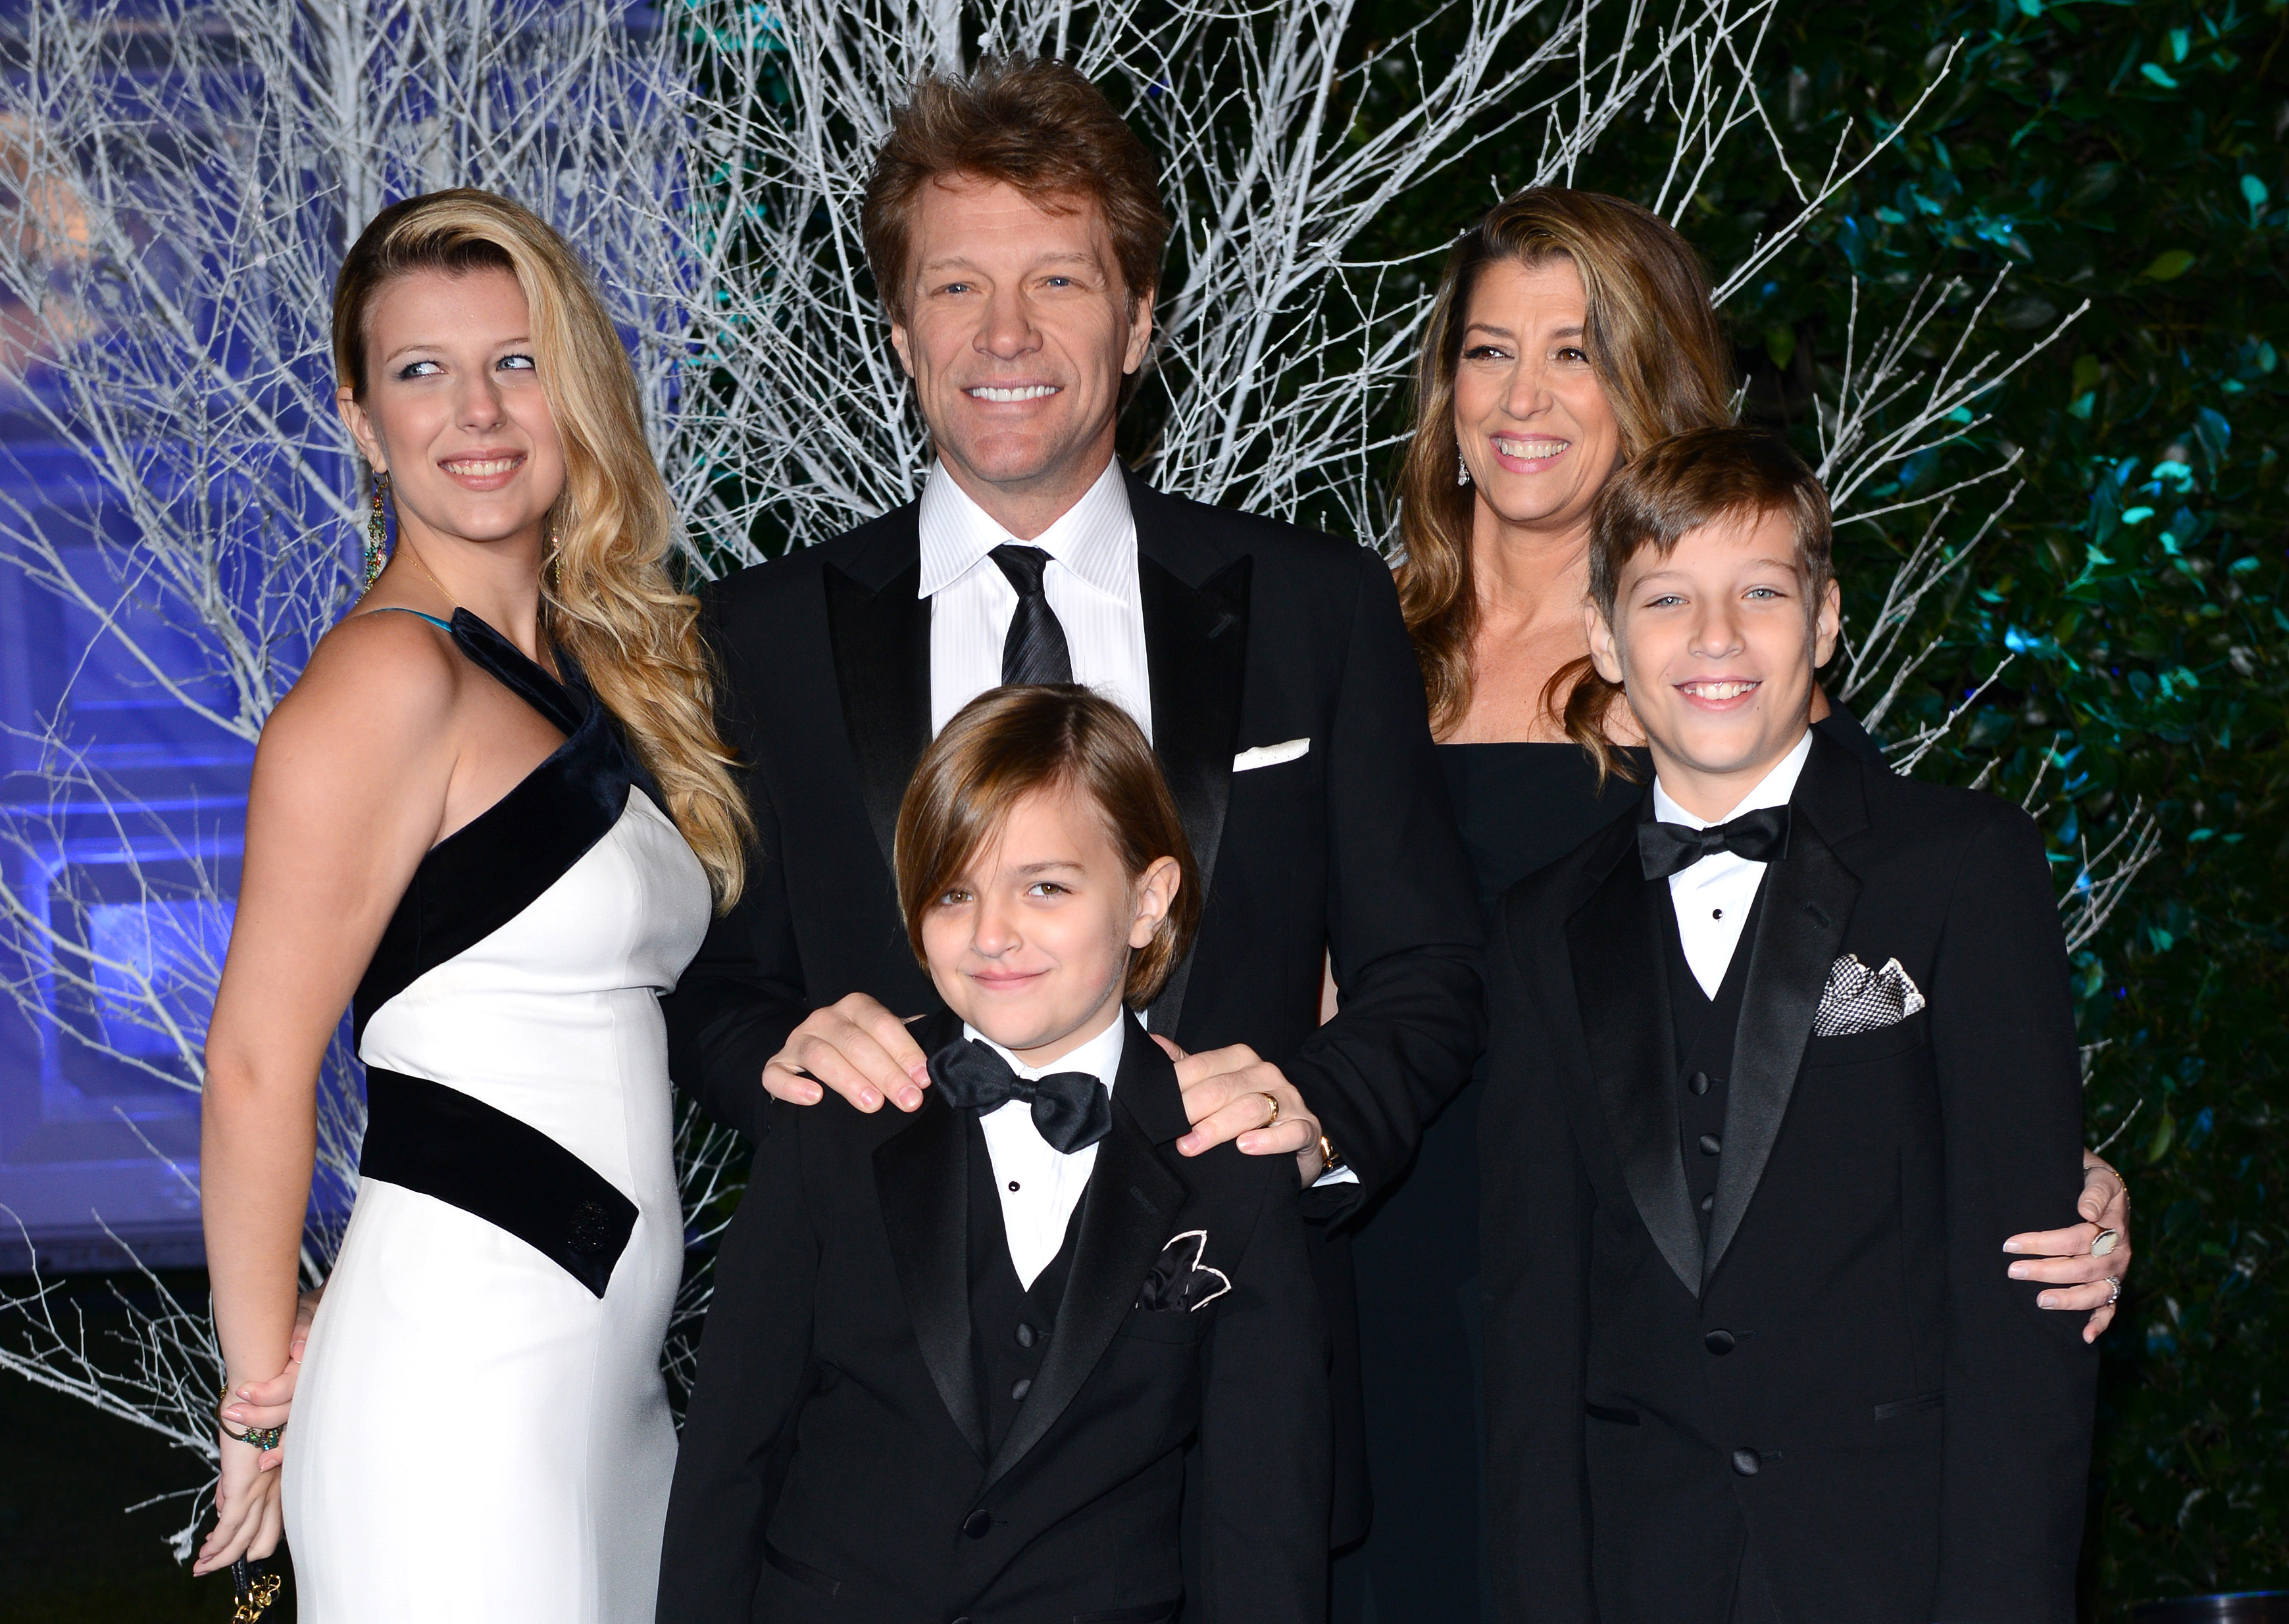 Jon Bon Jovi and Dorothea pictured with their kids Stephanie, Romeo and Jacob in 2013